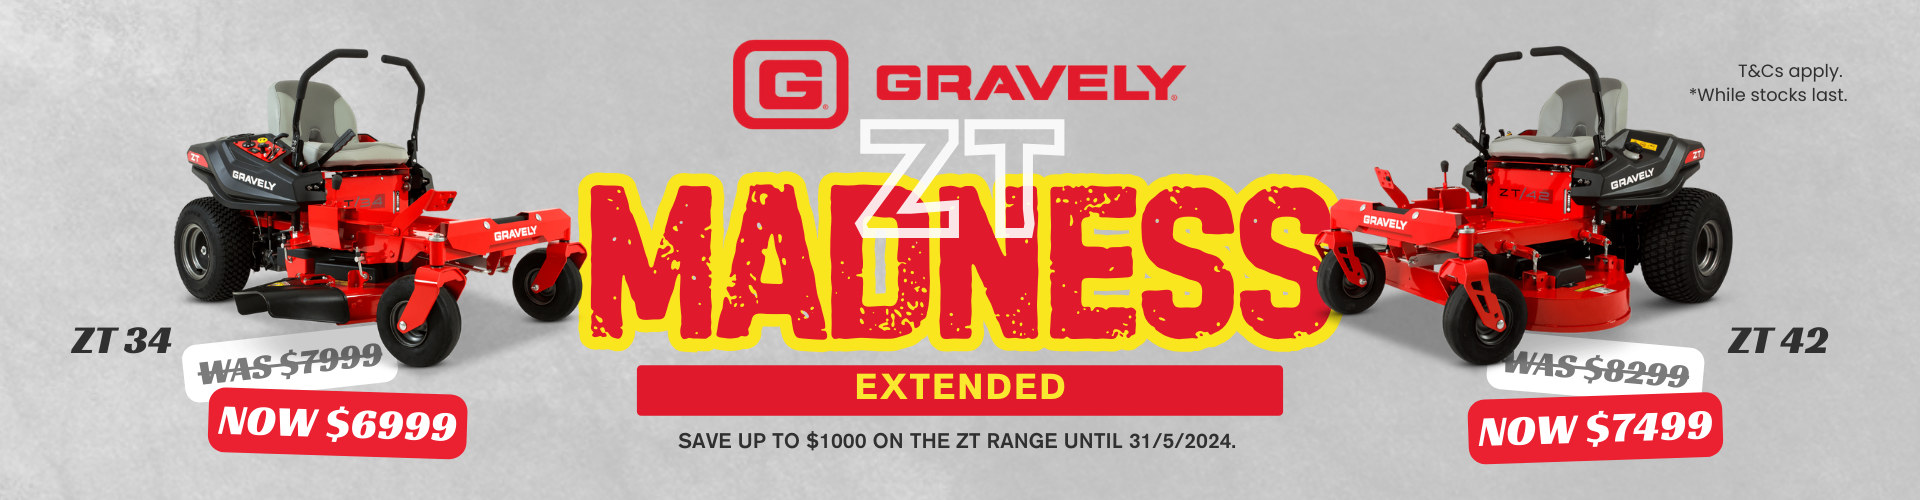 GRAVELY-ZT-Madness-2024-1